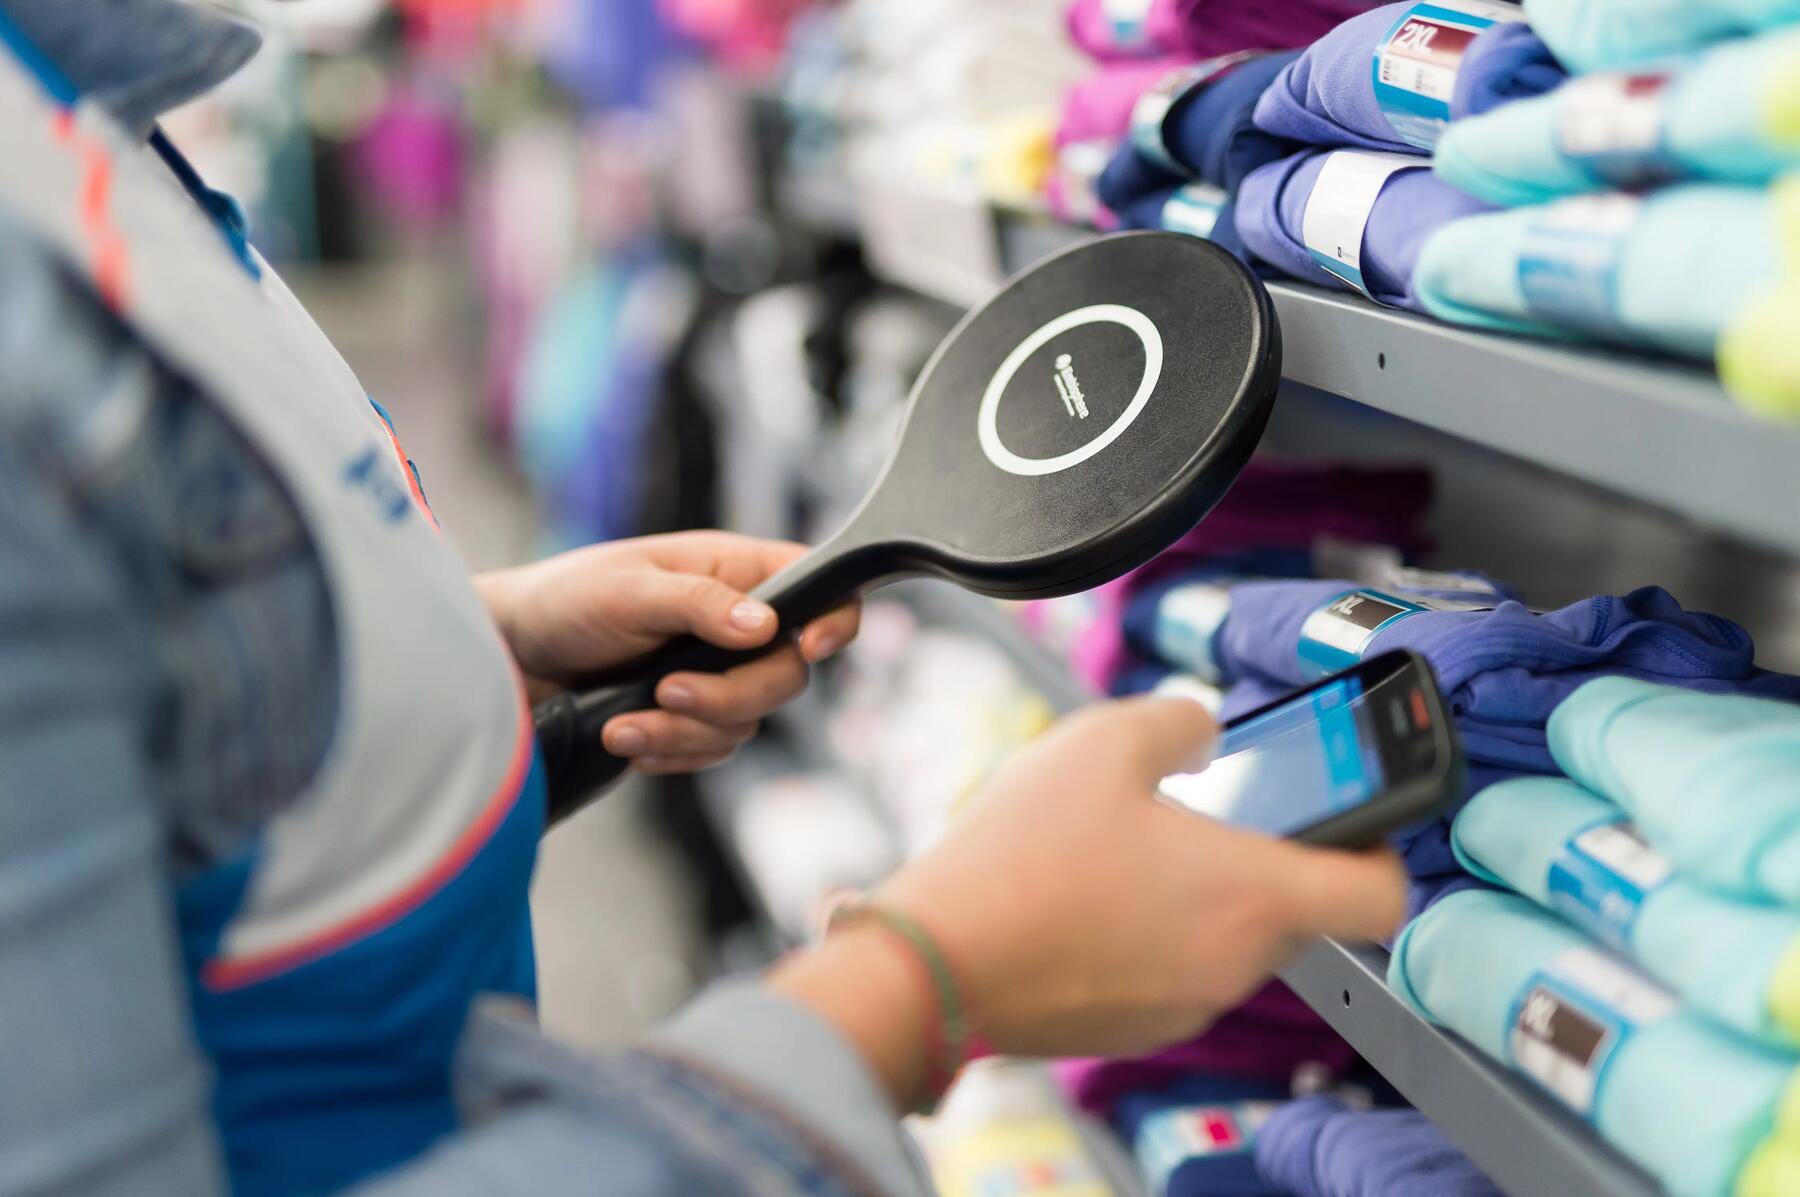 Product traceability and RFID technology at DECATHLON